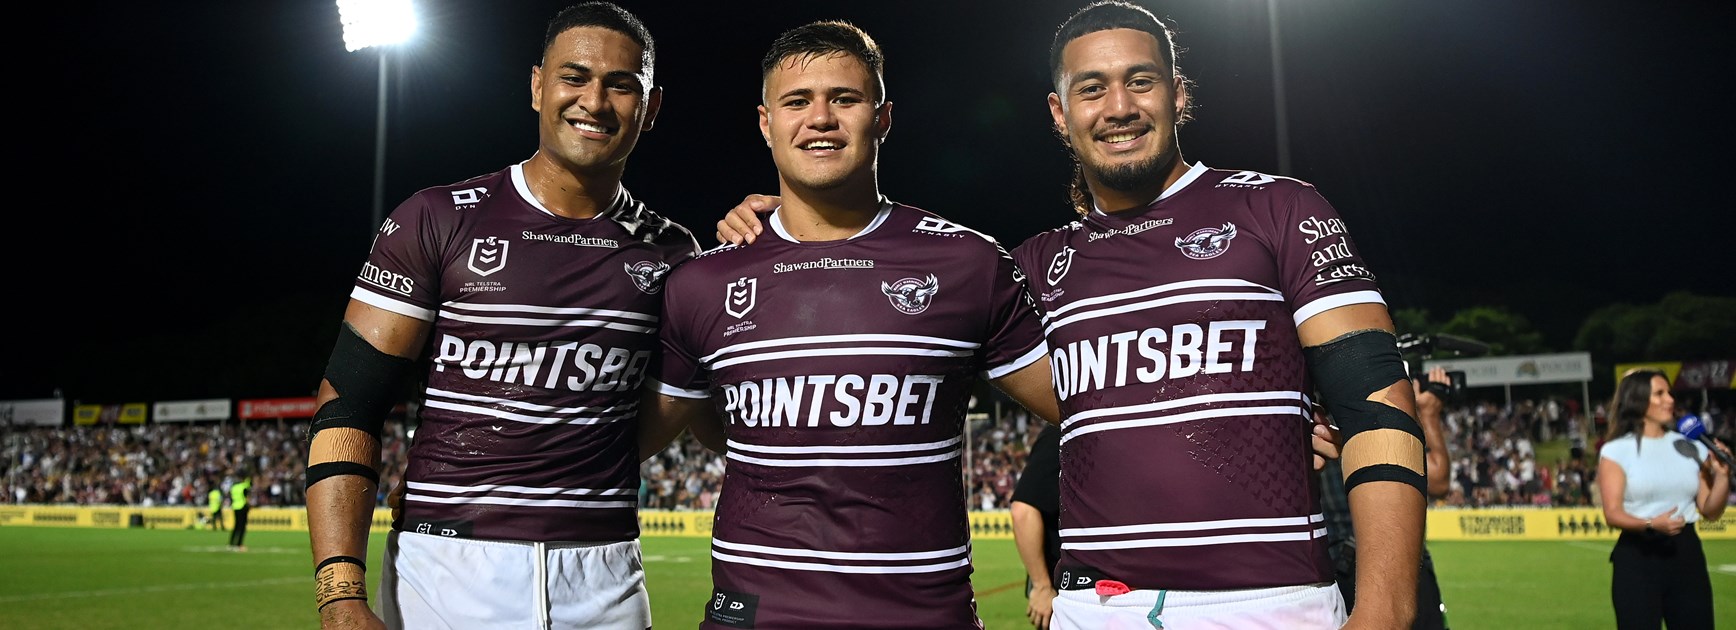 The Points That Count: Sea Eagles vs Rabbitohs